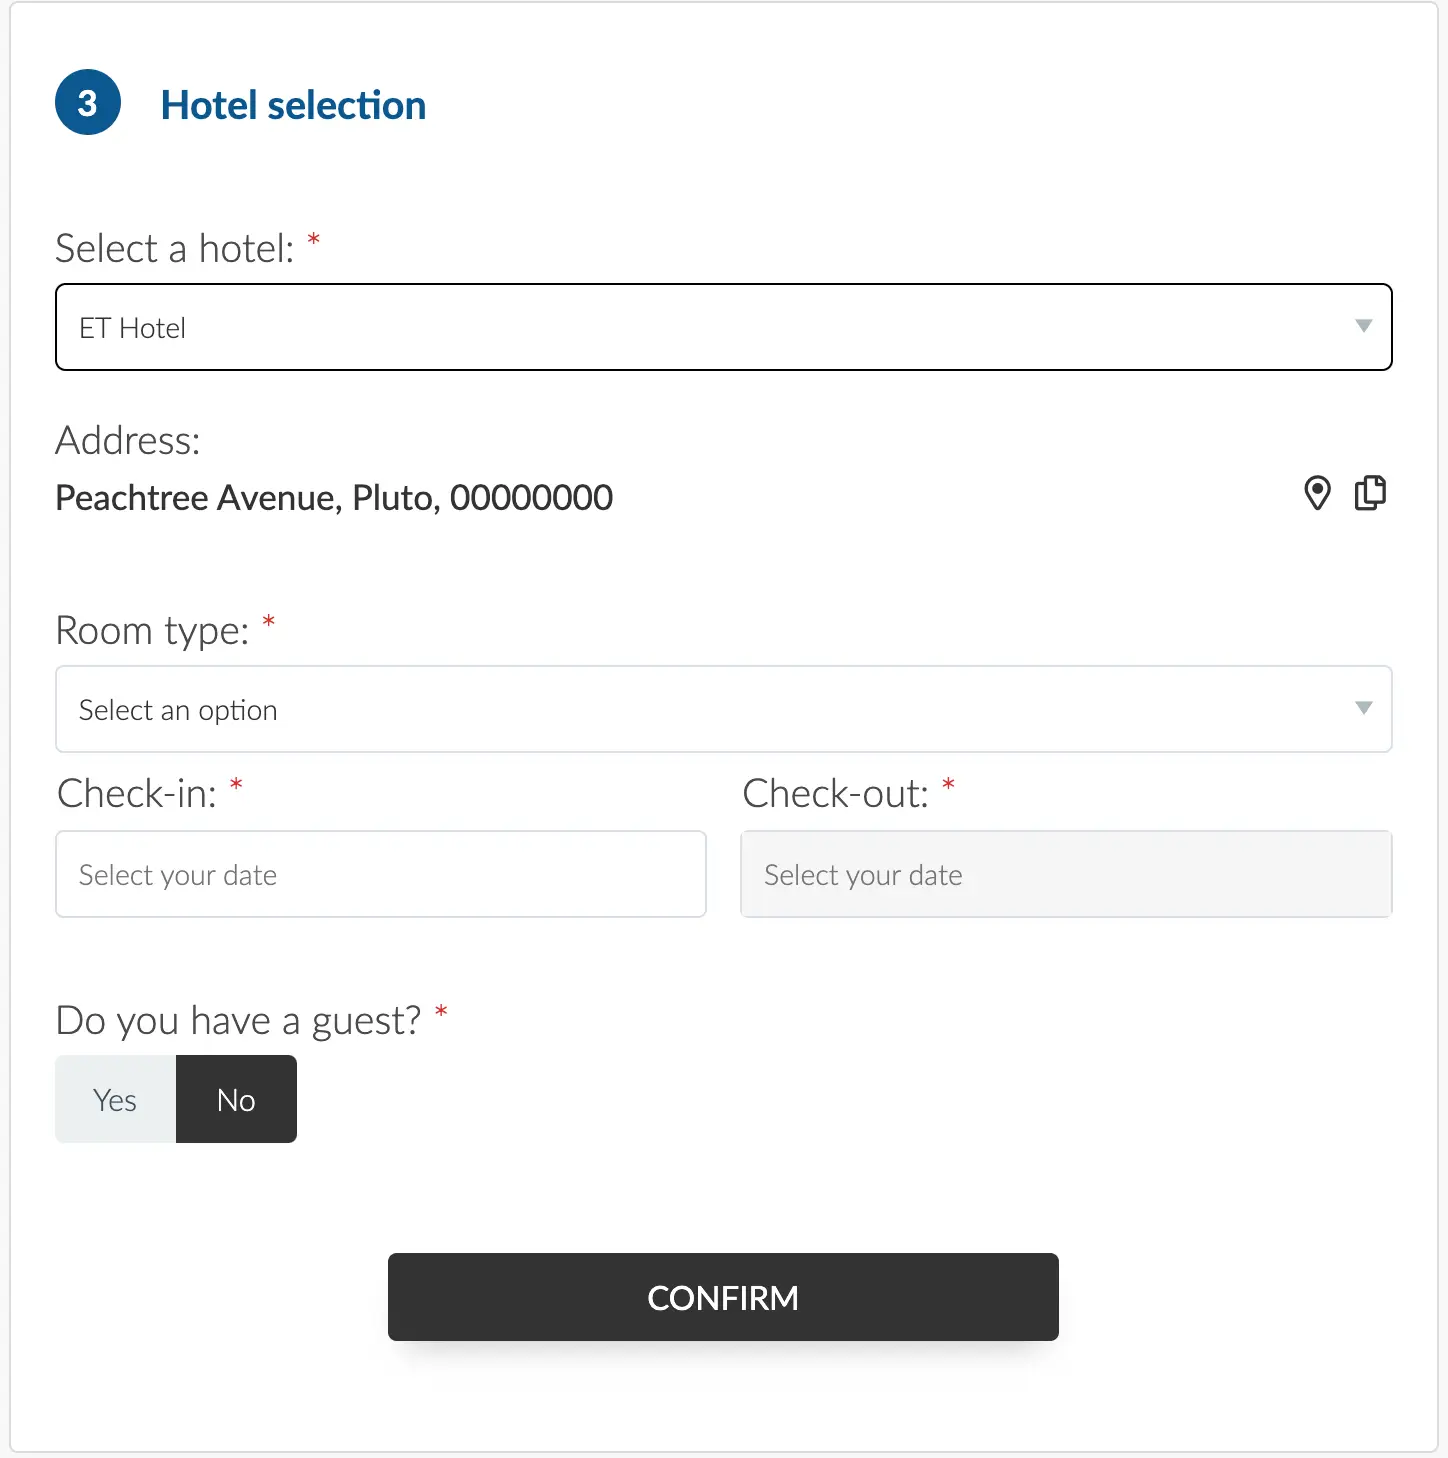 Hotel selection section will appear on the registration form